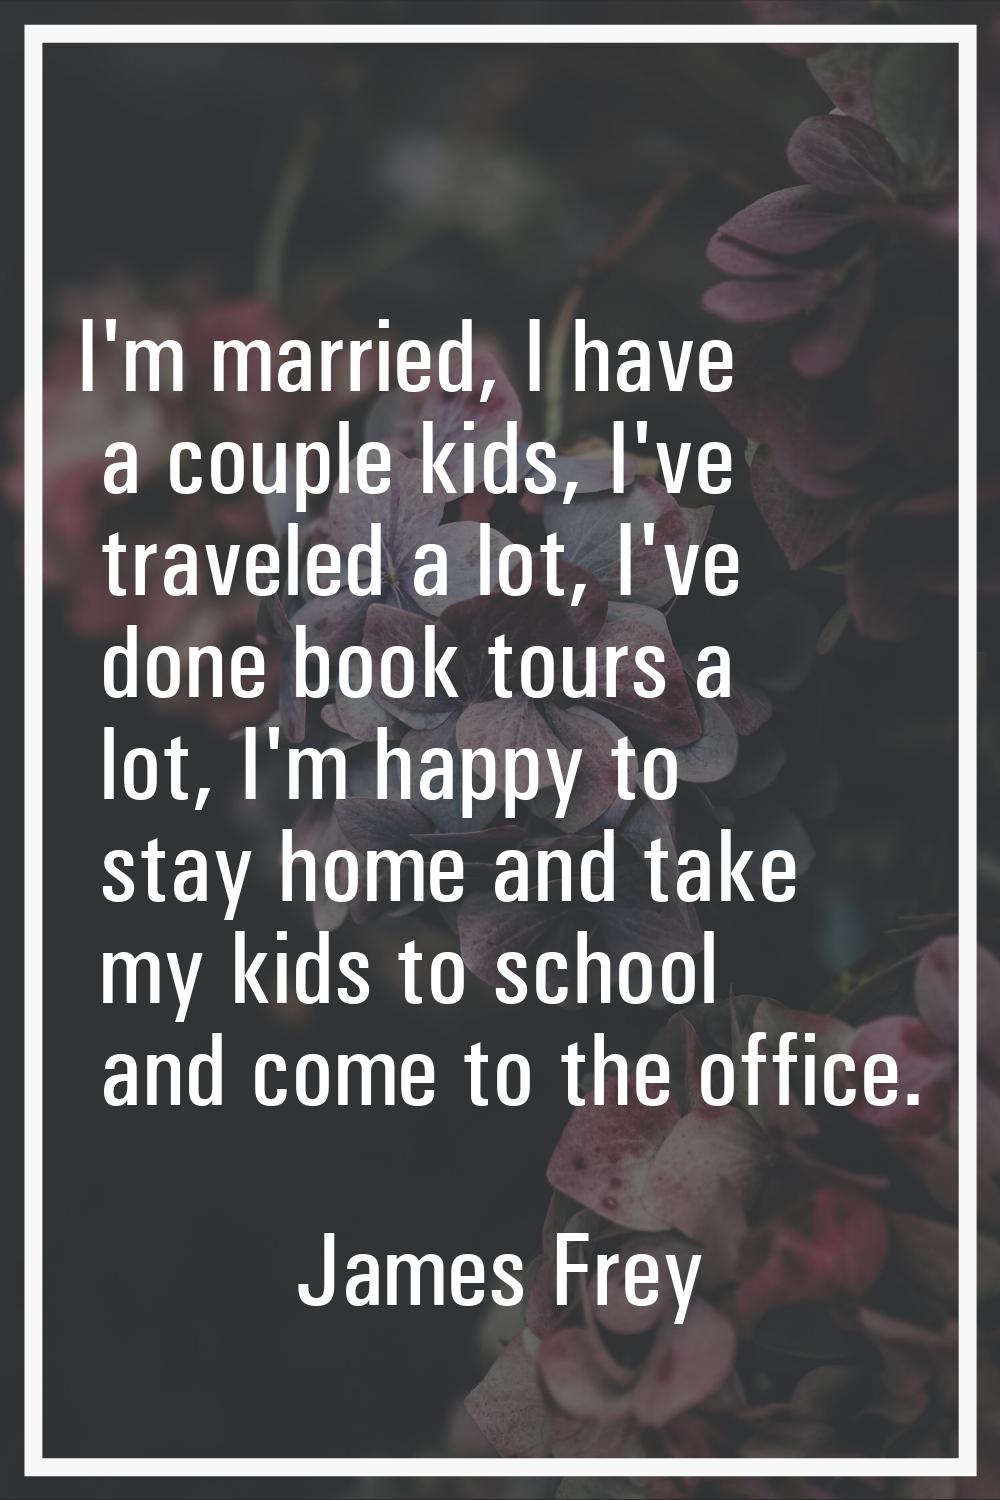 I'm married, I have a couple kids, I've traveled a lot, I've done book tours a lot, I'm happy to st